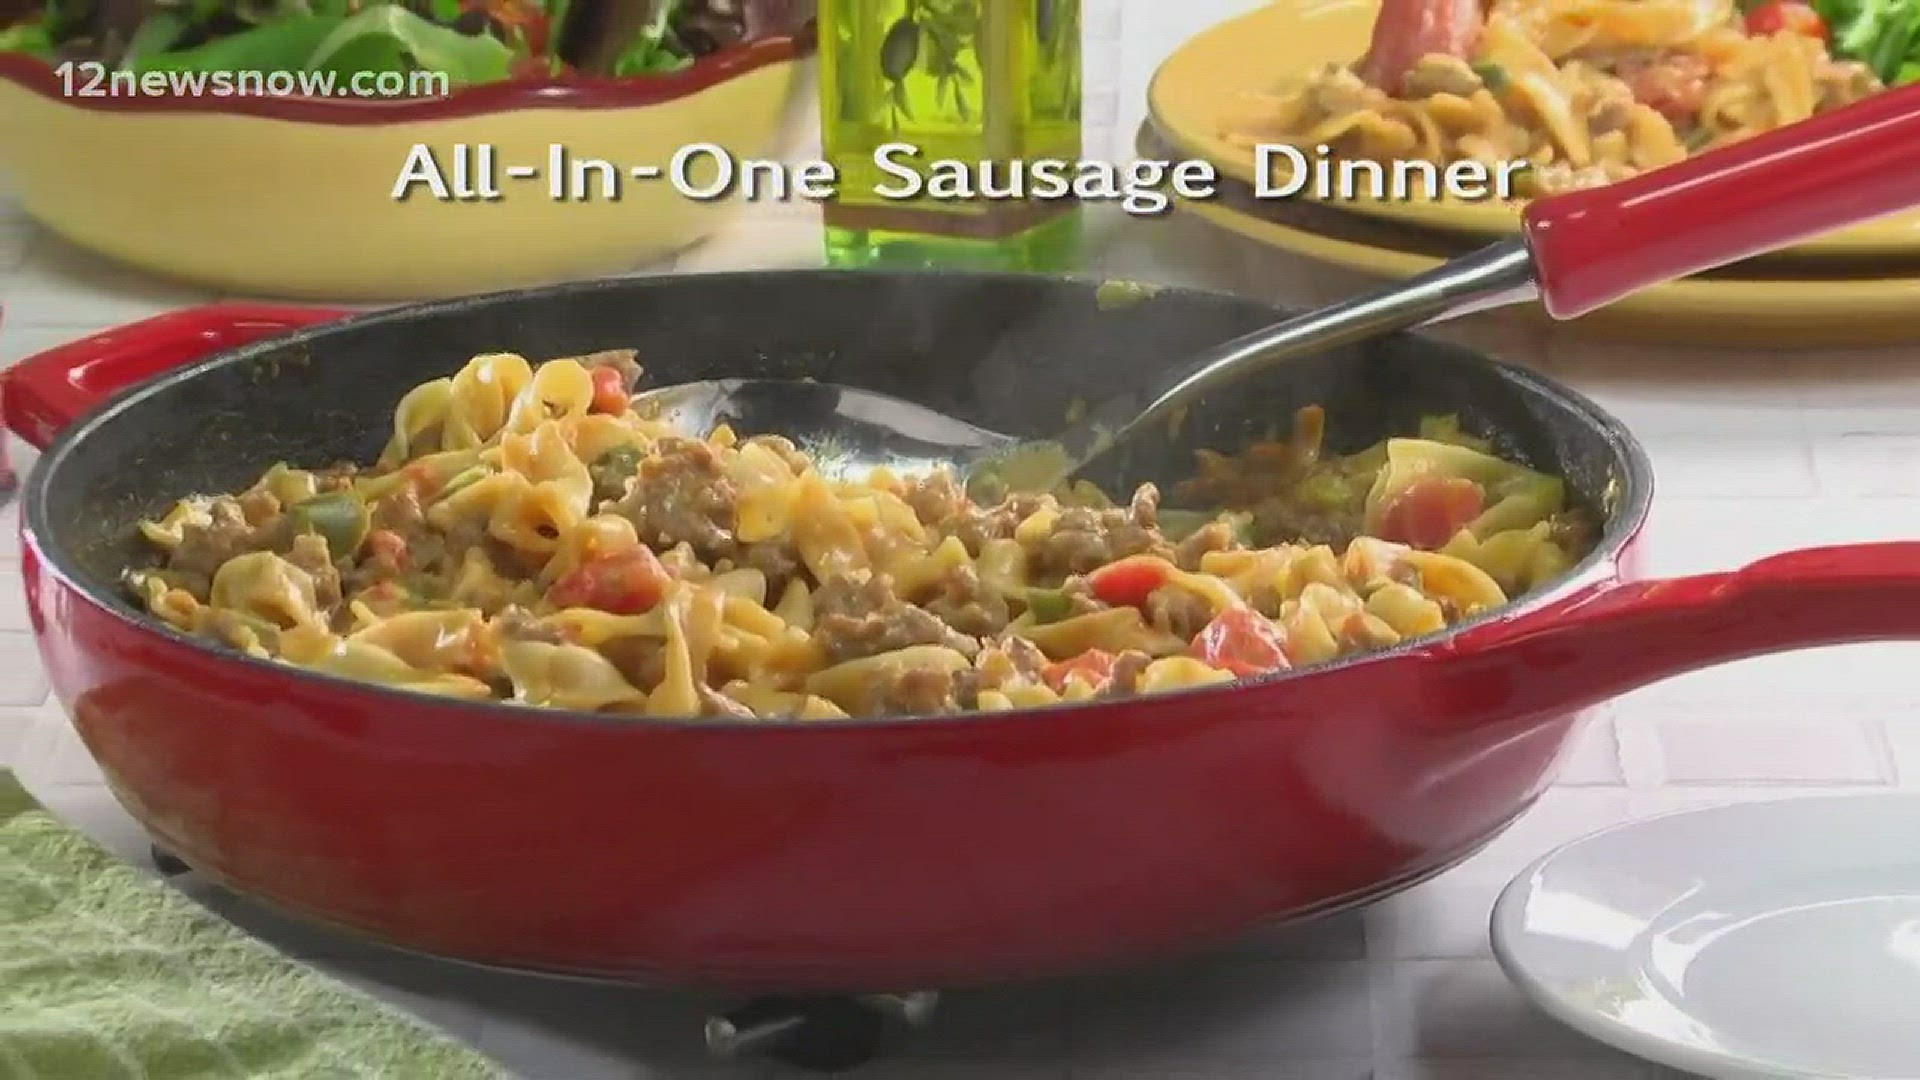 Mr. Food makes 'All-In-One Sausage Dinner'